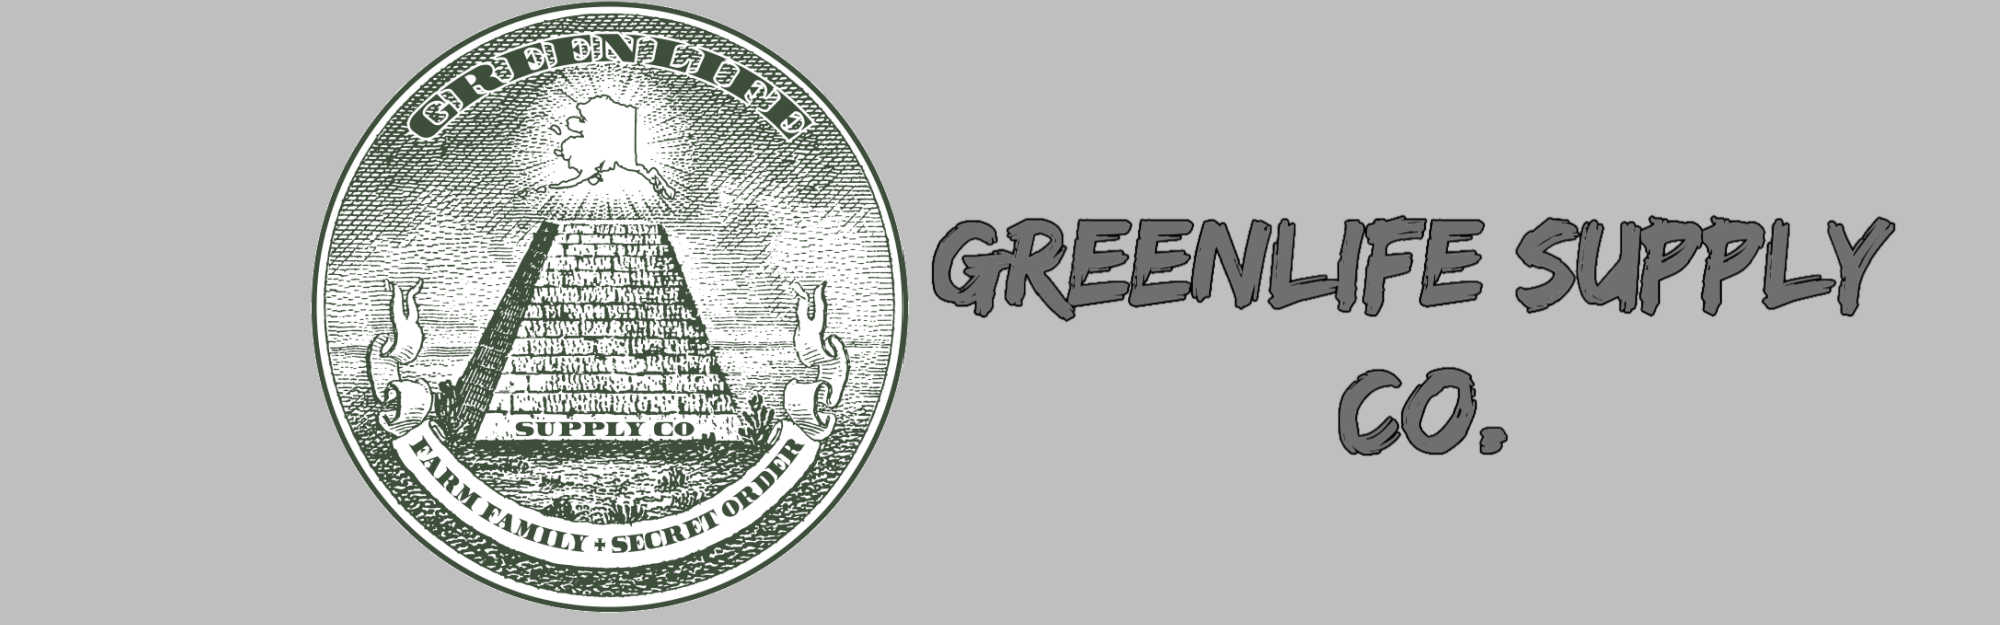 image of greenlife supply co logo